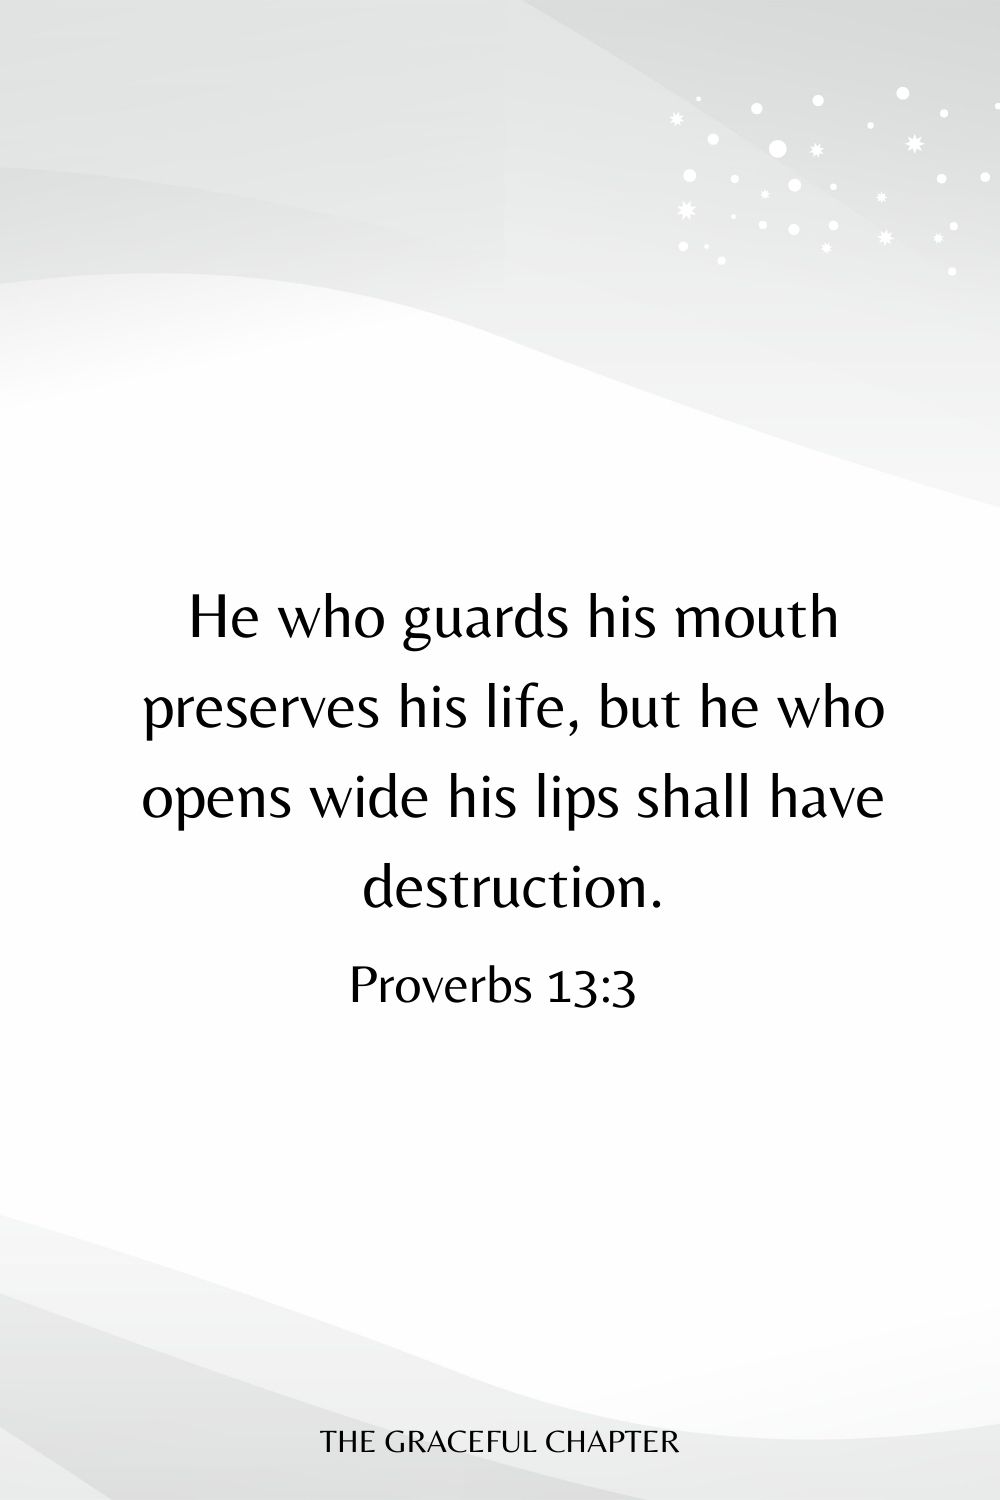 He who guards his mouth preserves his life, But he who opens wide his lips shall have destruction. Proverbs 13:3